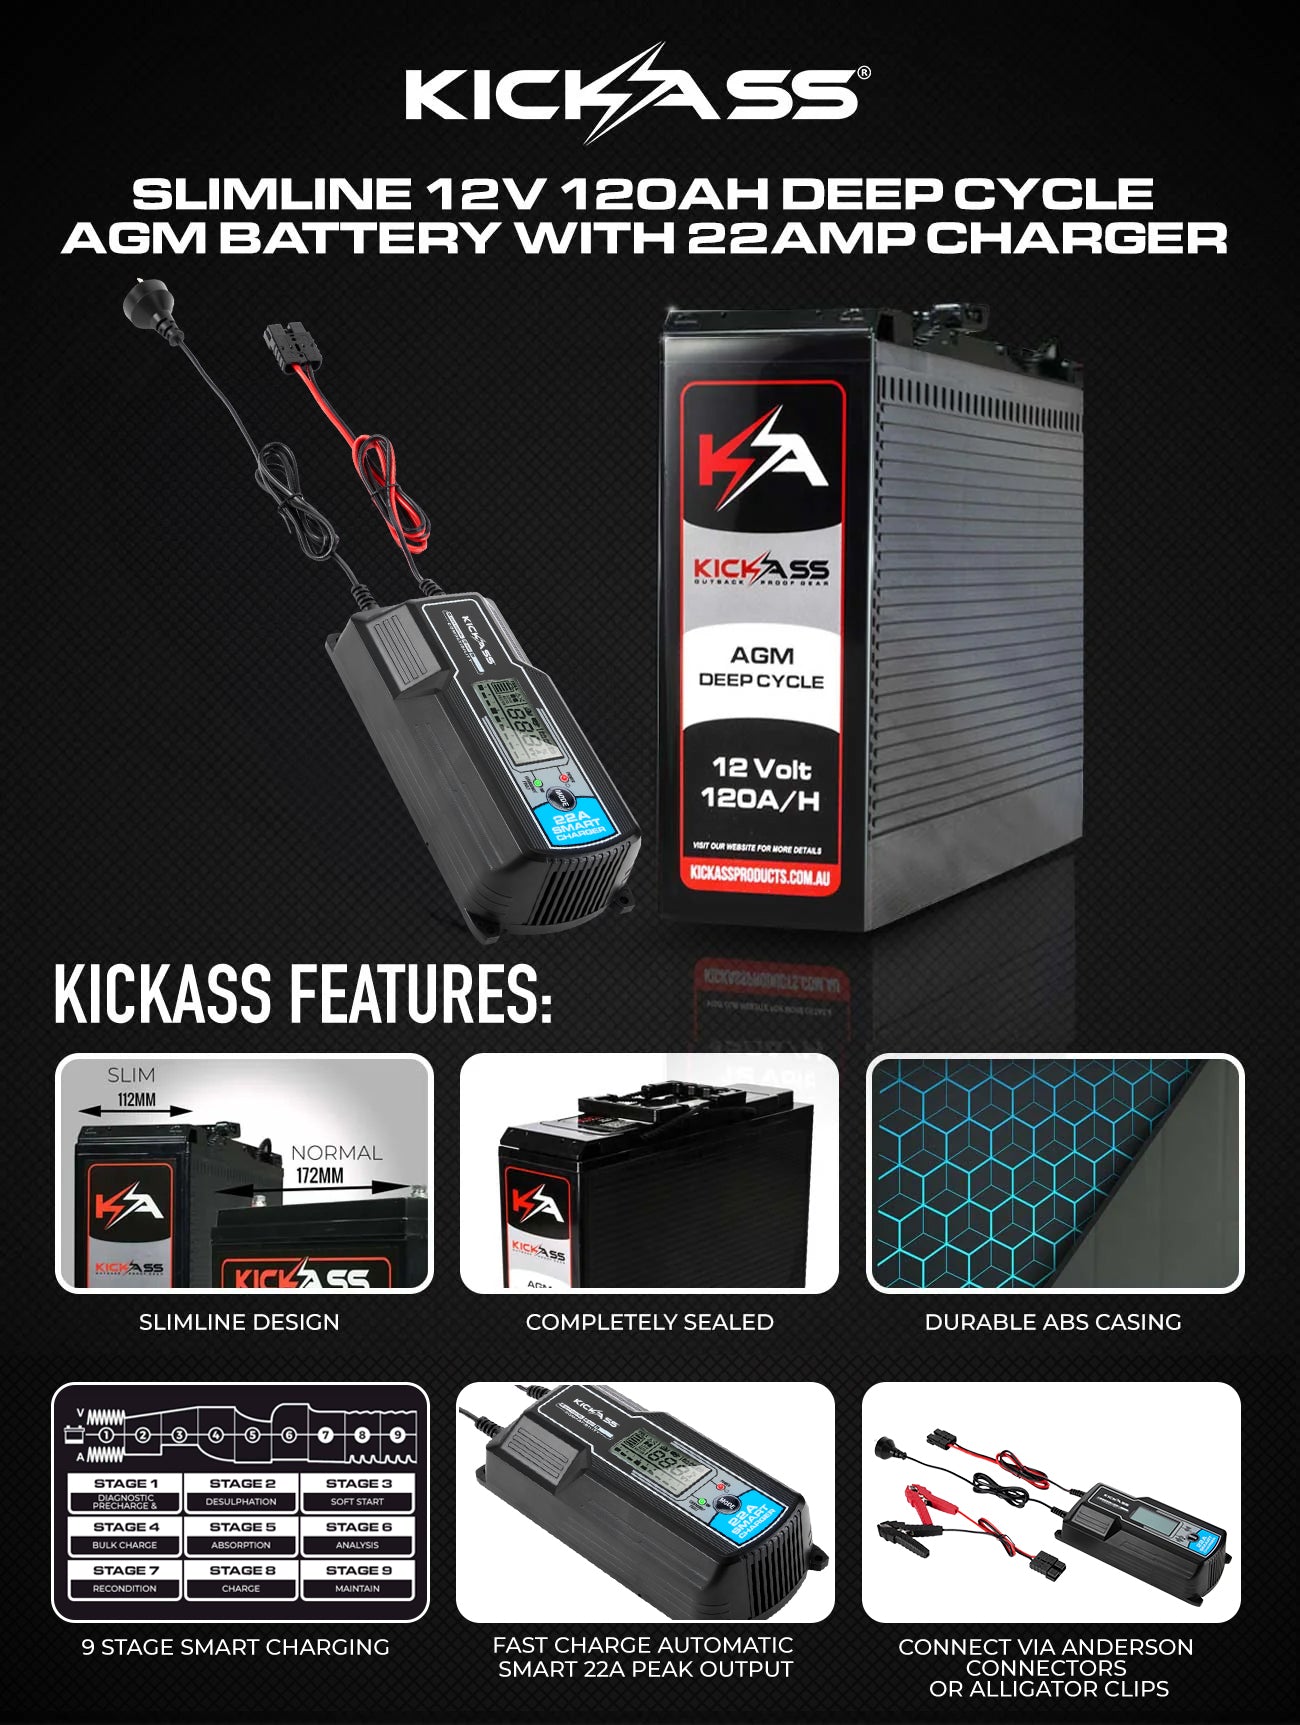 12V 120AH Slim Deep Cycle AGM Battery with 12AMP Charger